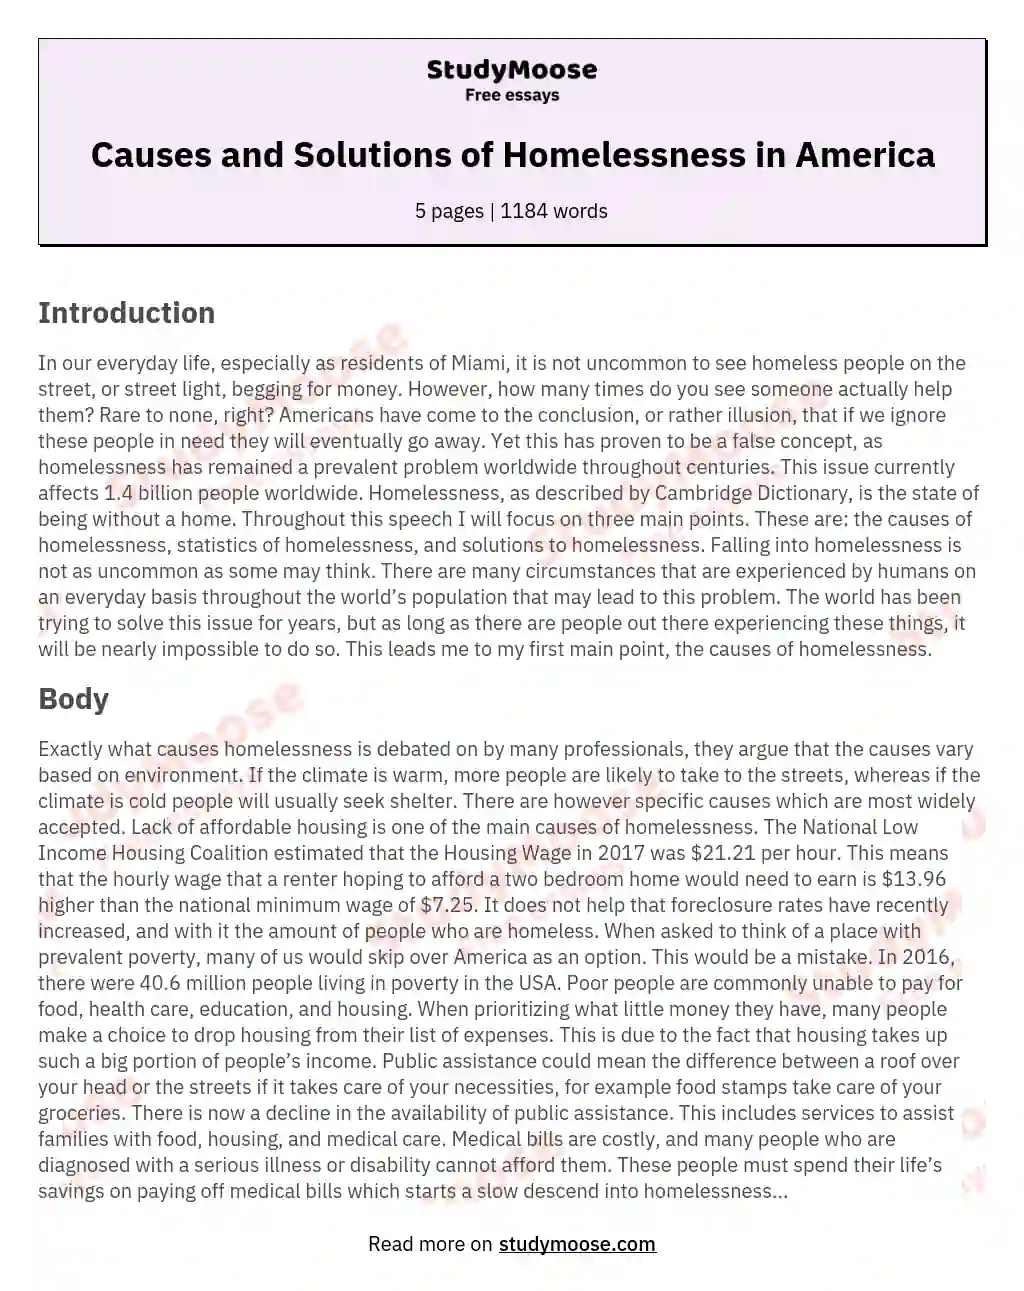 Causes and Solutions of Homelessness in America essay